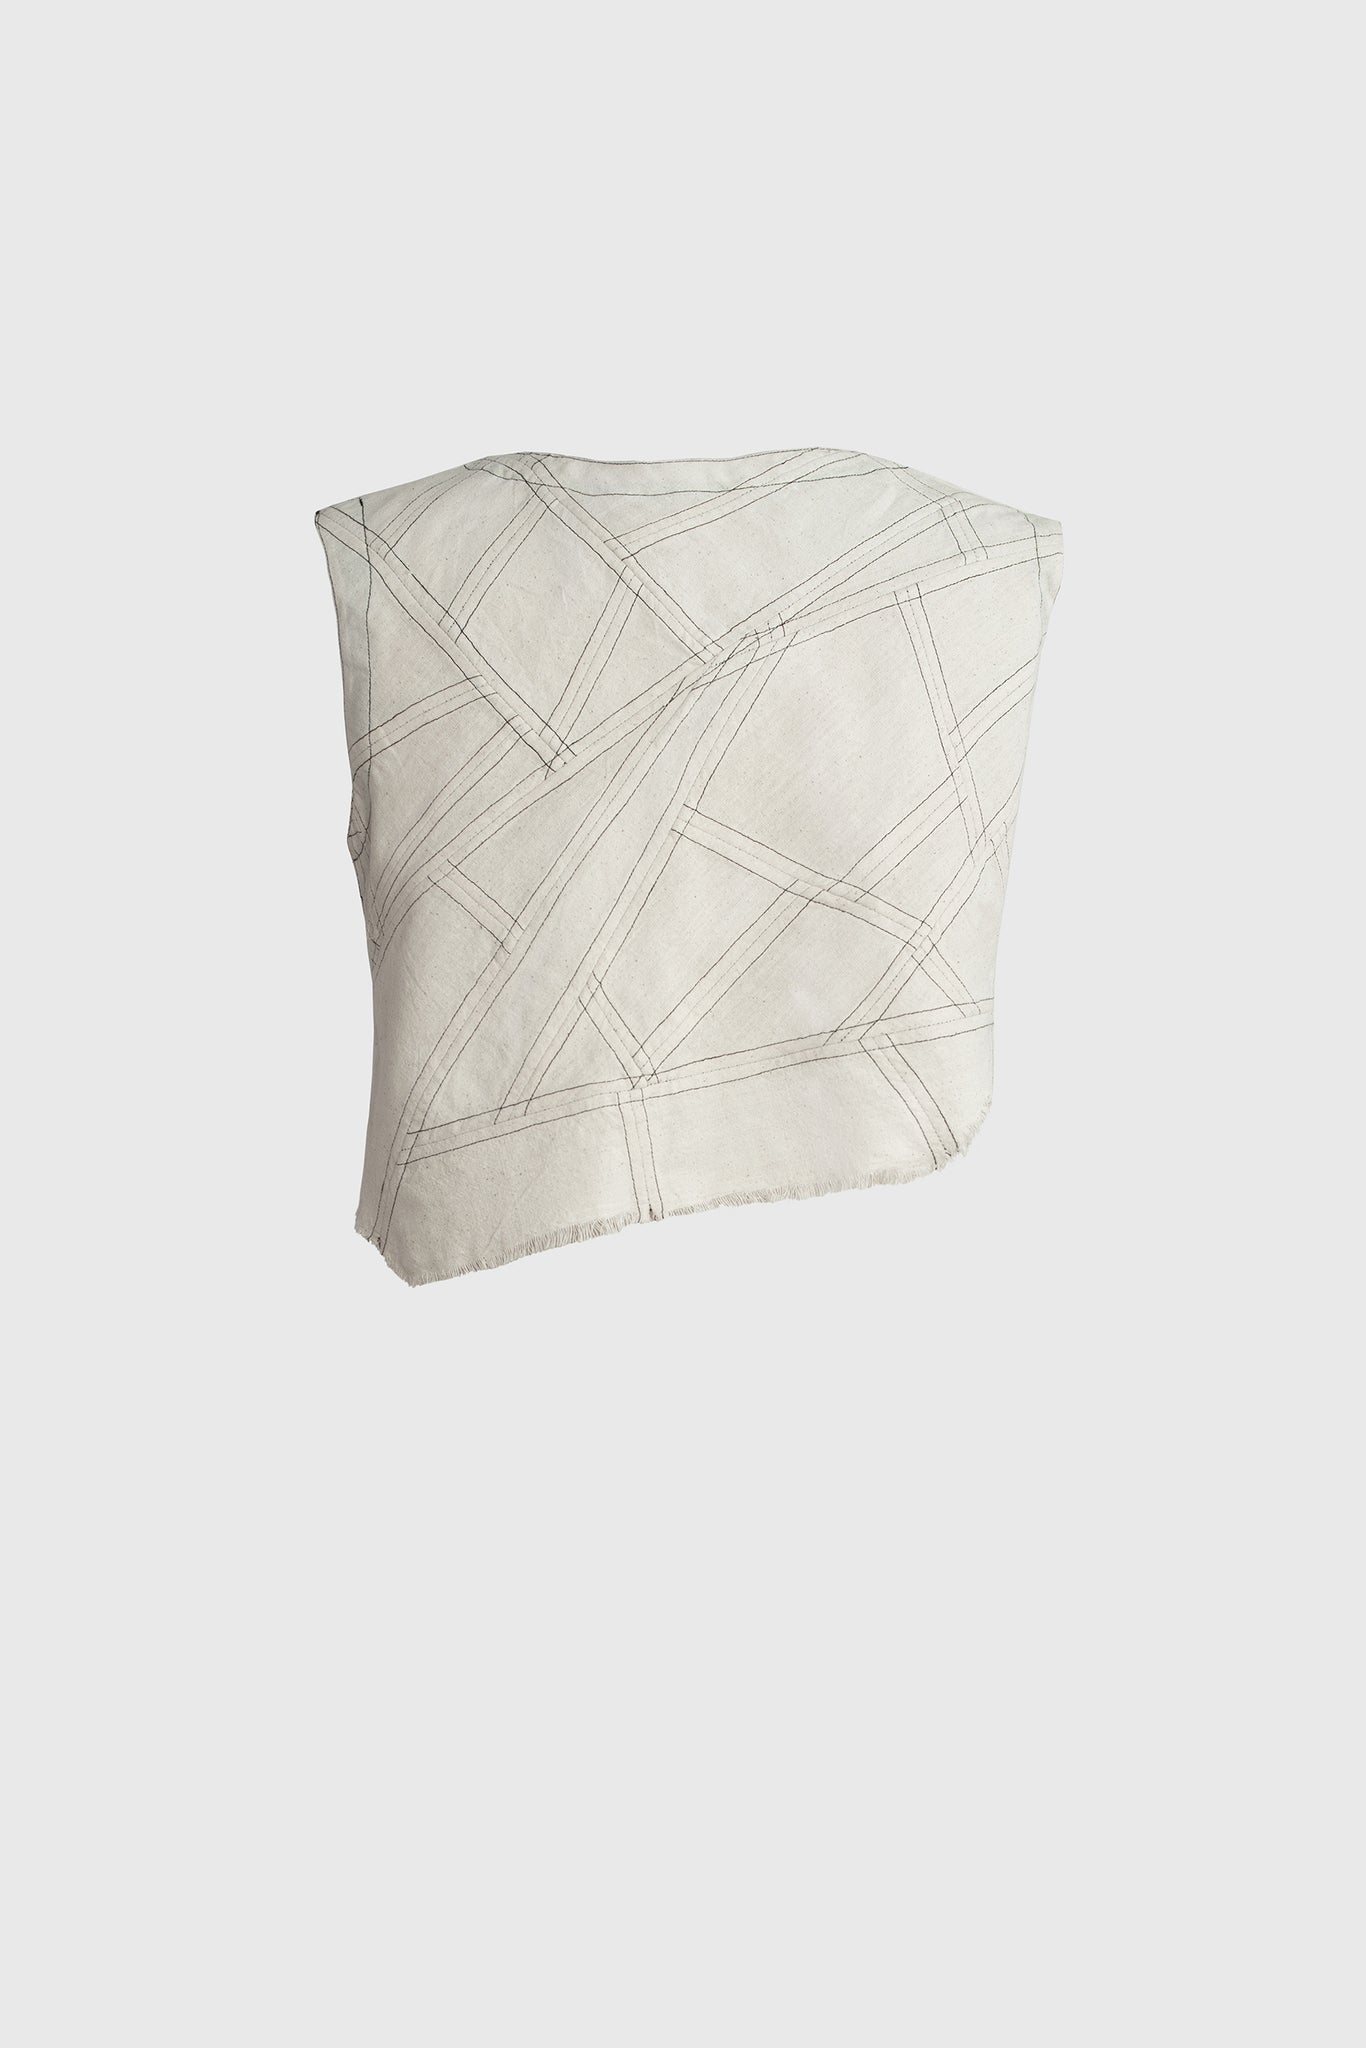 Cropped top, with signature geometric irregular patchwork design, tedious technique, fringed edge, irregular hemline, round sleeve cuts, spring summer style, cool, white rock fashion 